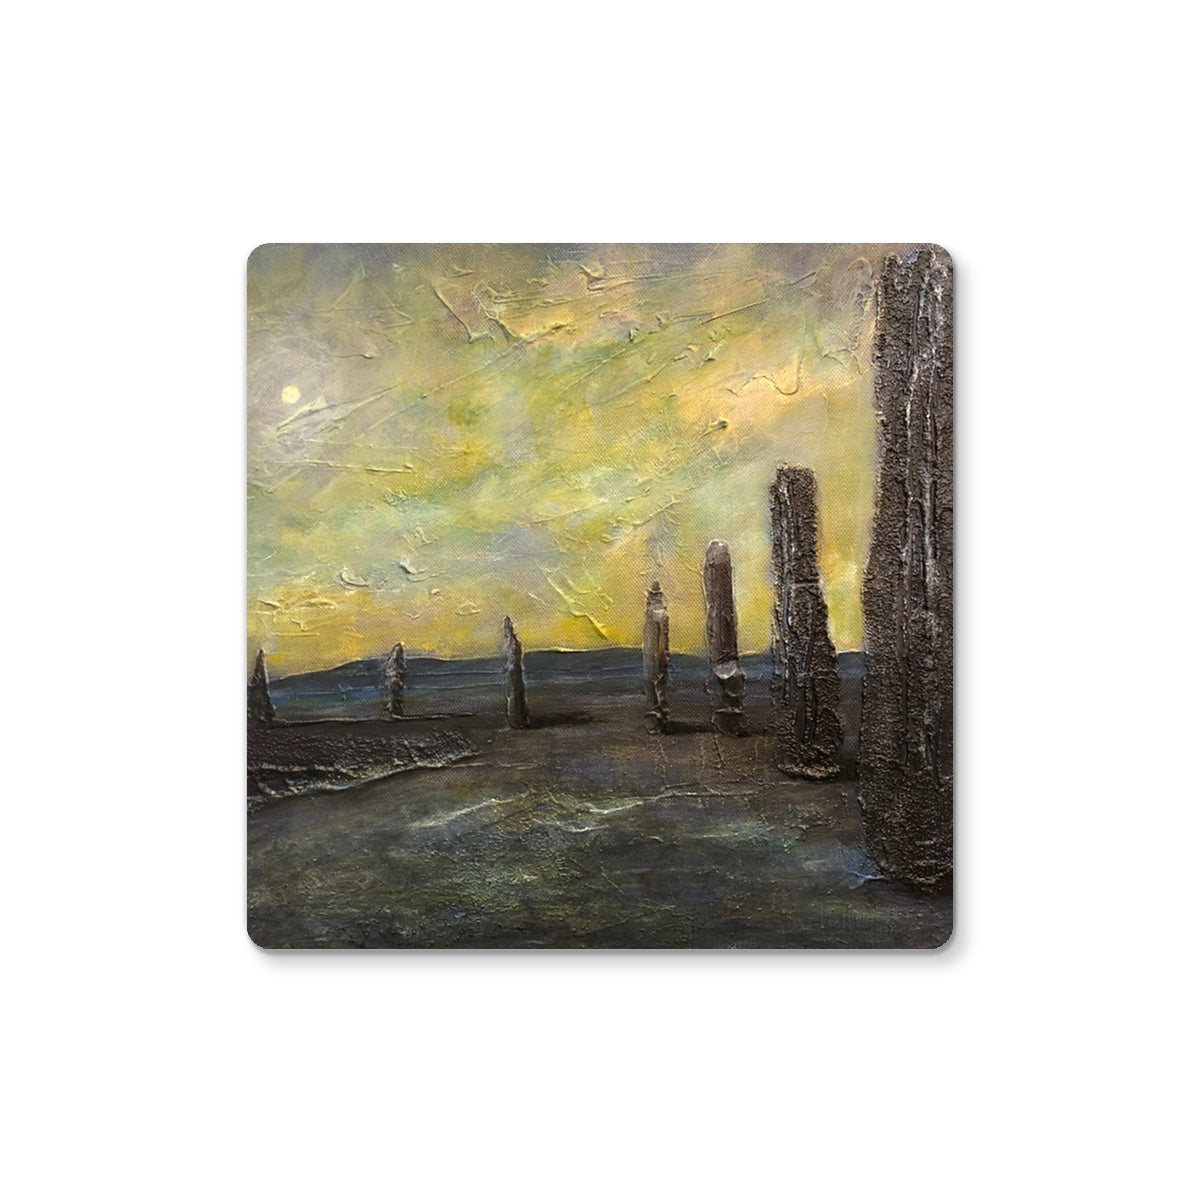 An Ethereal Ring Of Brodgar Art Gifts Coaster-Coasters-Orkney Art Gallery-4 Coasters-Paintings, Prints, Homeware, Art Gifts From Scotland By Scottish Artist Kevin Hunter